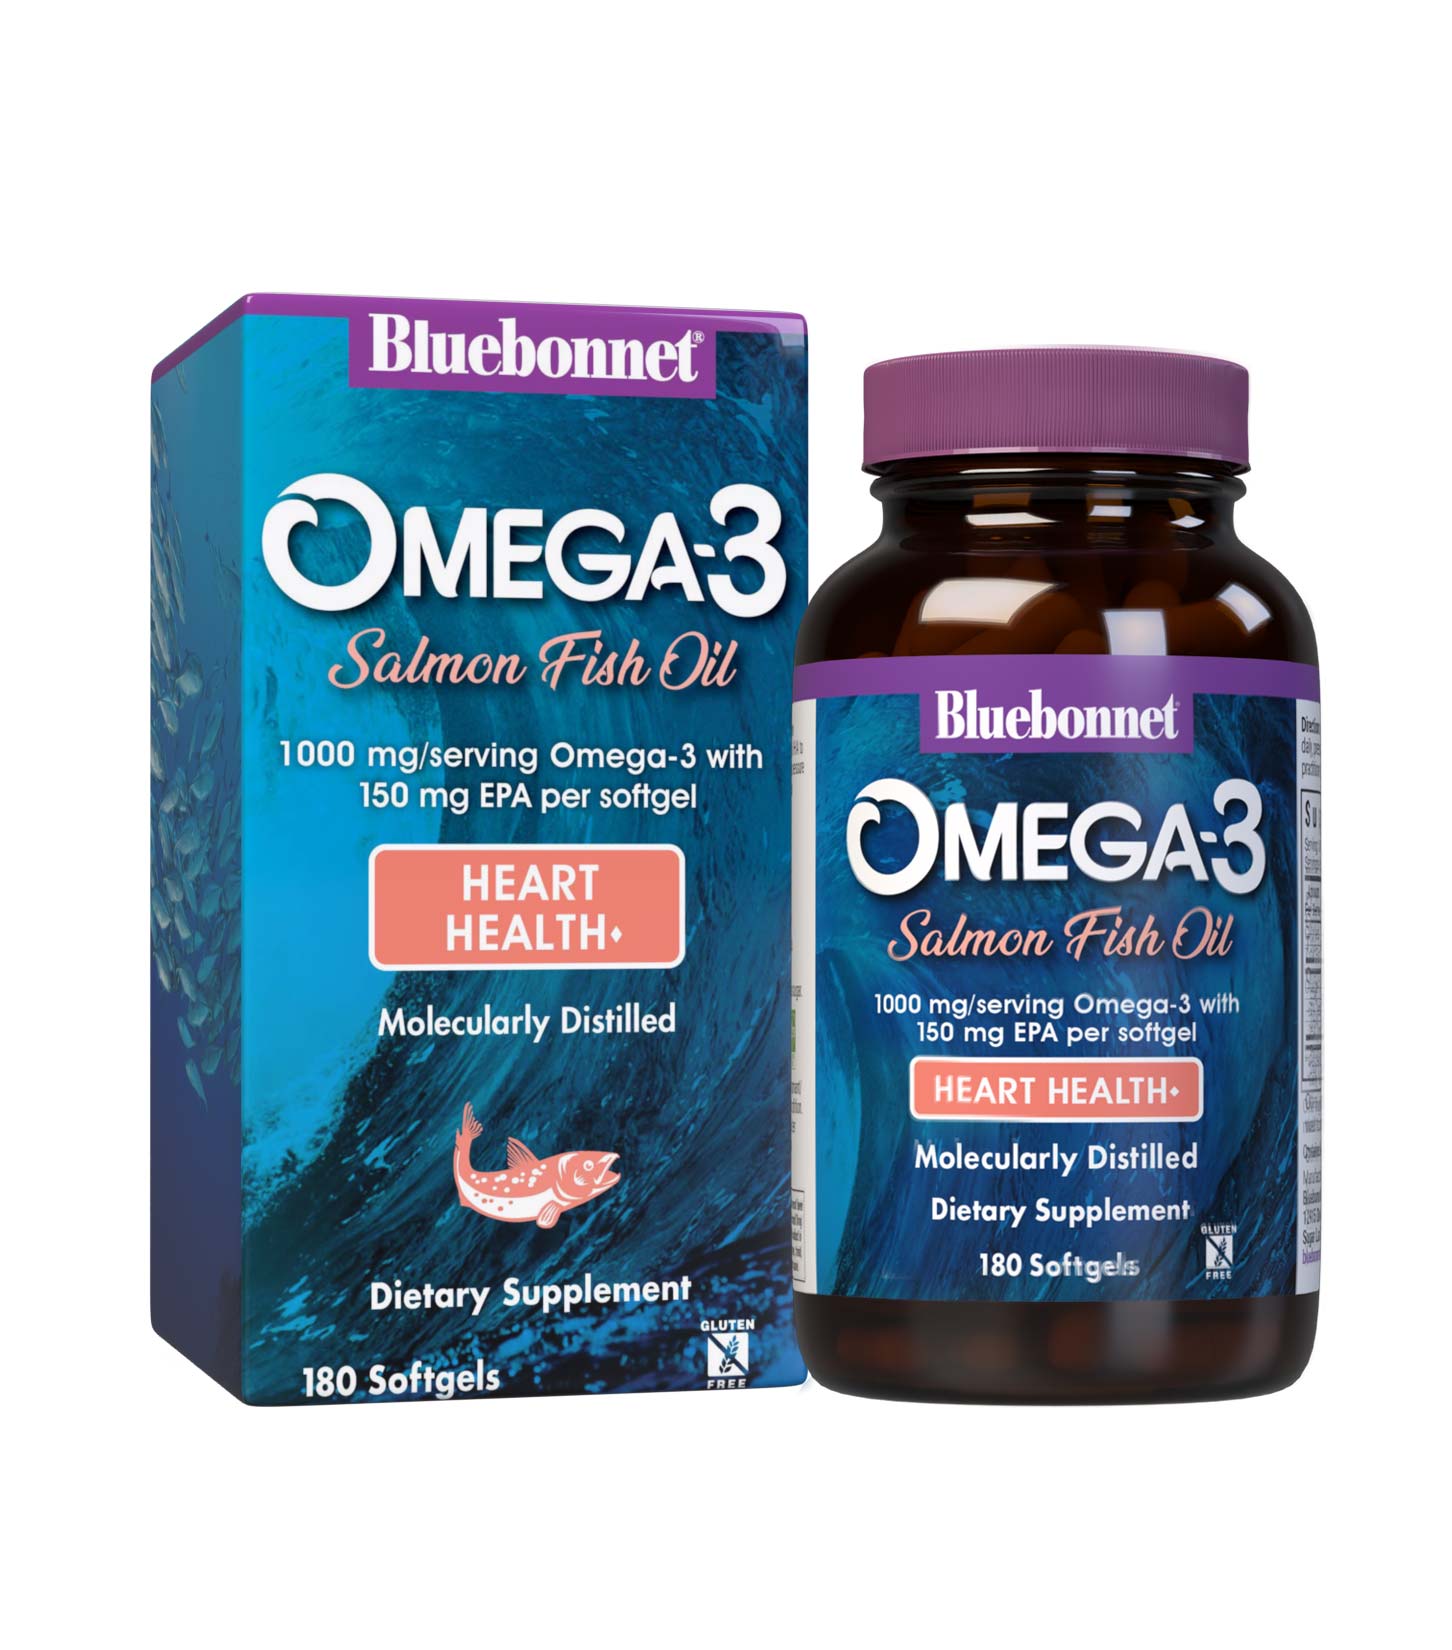 Bluebonnet’s Omega-3 Salmon Oil 180 Softgels are formulated with a specific ratio of EPA and DHA to help support heart health, blood flow, and blood pressure within the normal range by utilizing ultra-refined omega 3-s from salmon fish oil. Bottle with box. #size_180 count